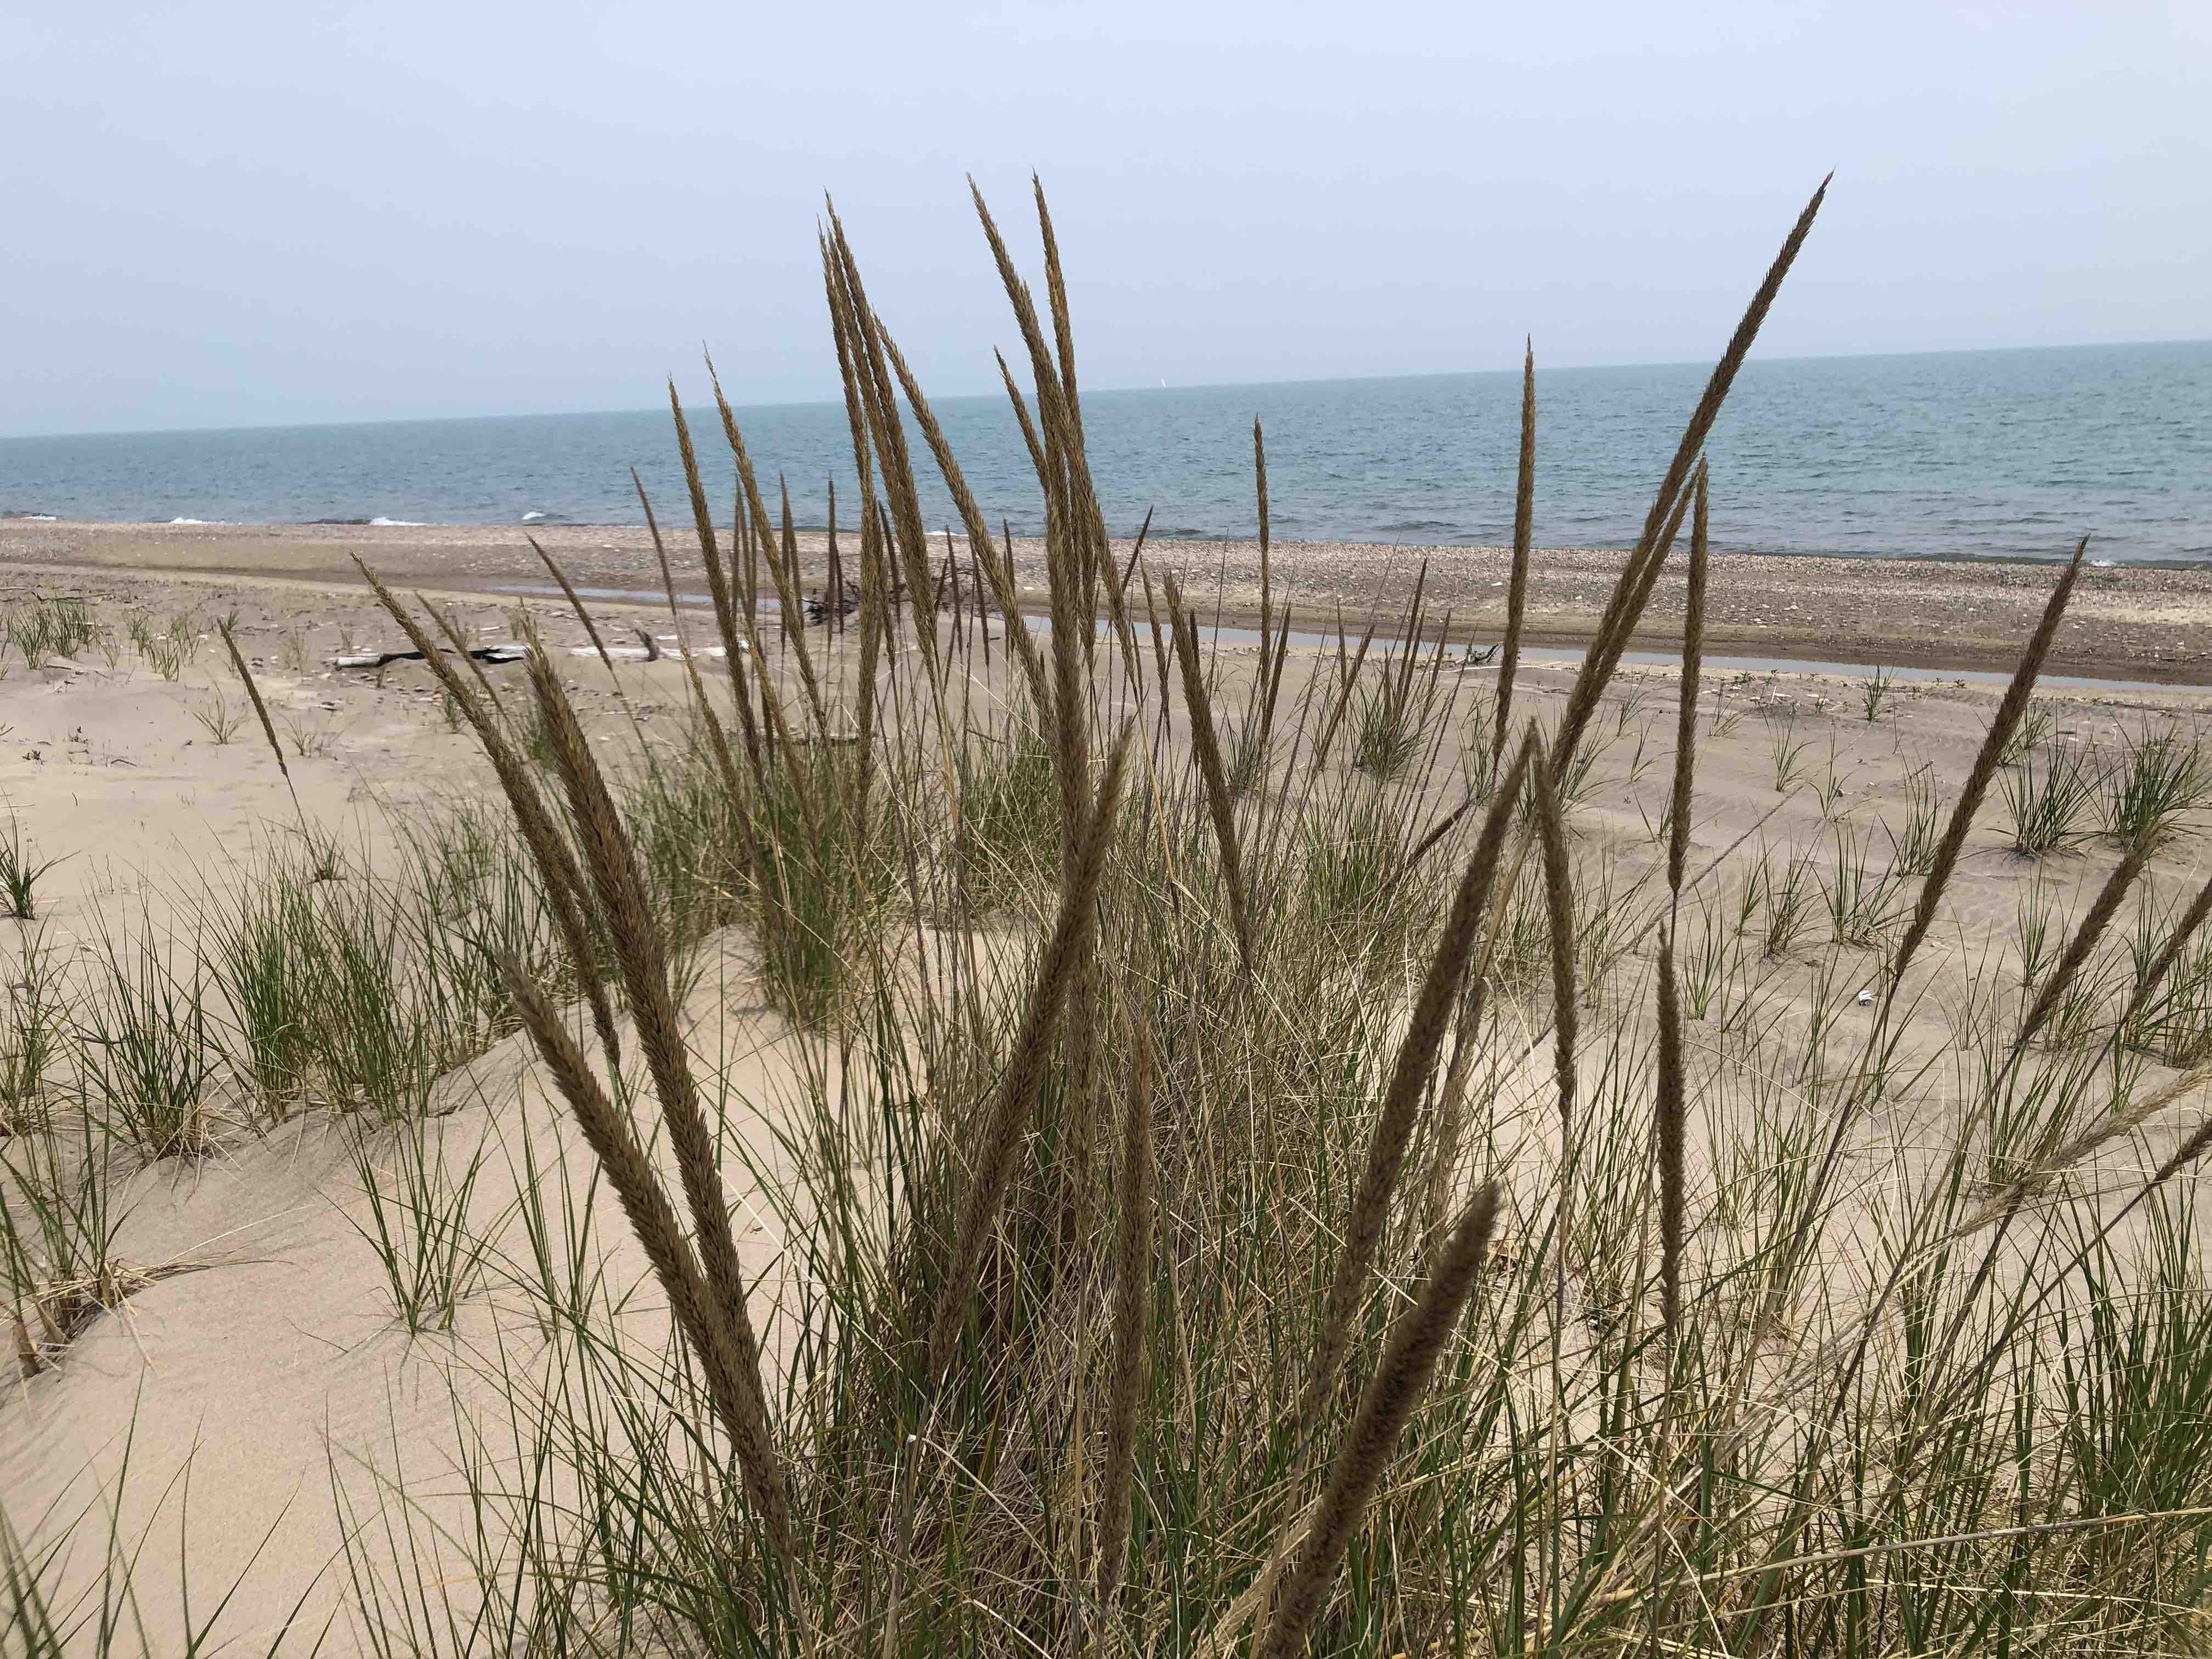 Illinois Beach State Park boasts some of the highest quality remnant habitat in the Midwest, but it’s being threatened by invasive plant species. (Patty Wetli / WTTW News)